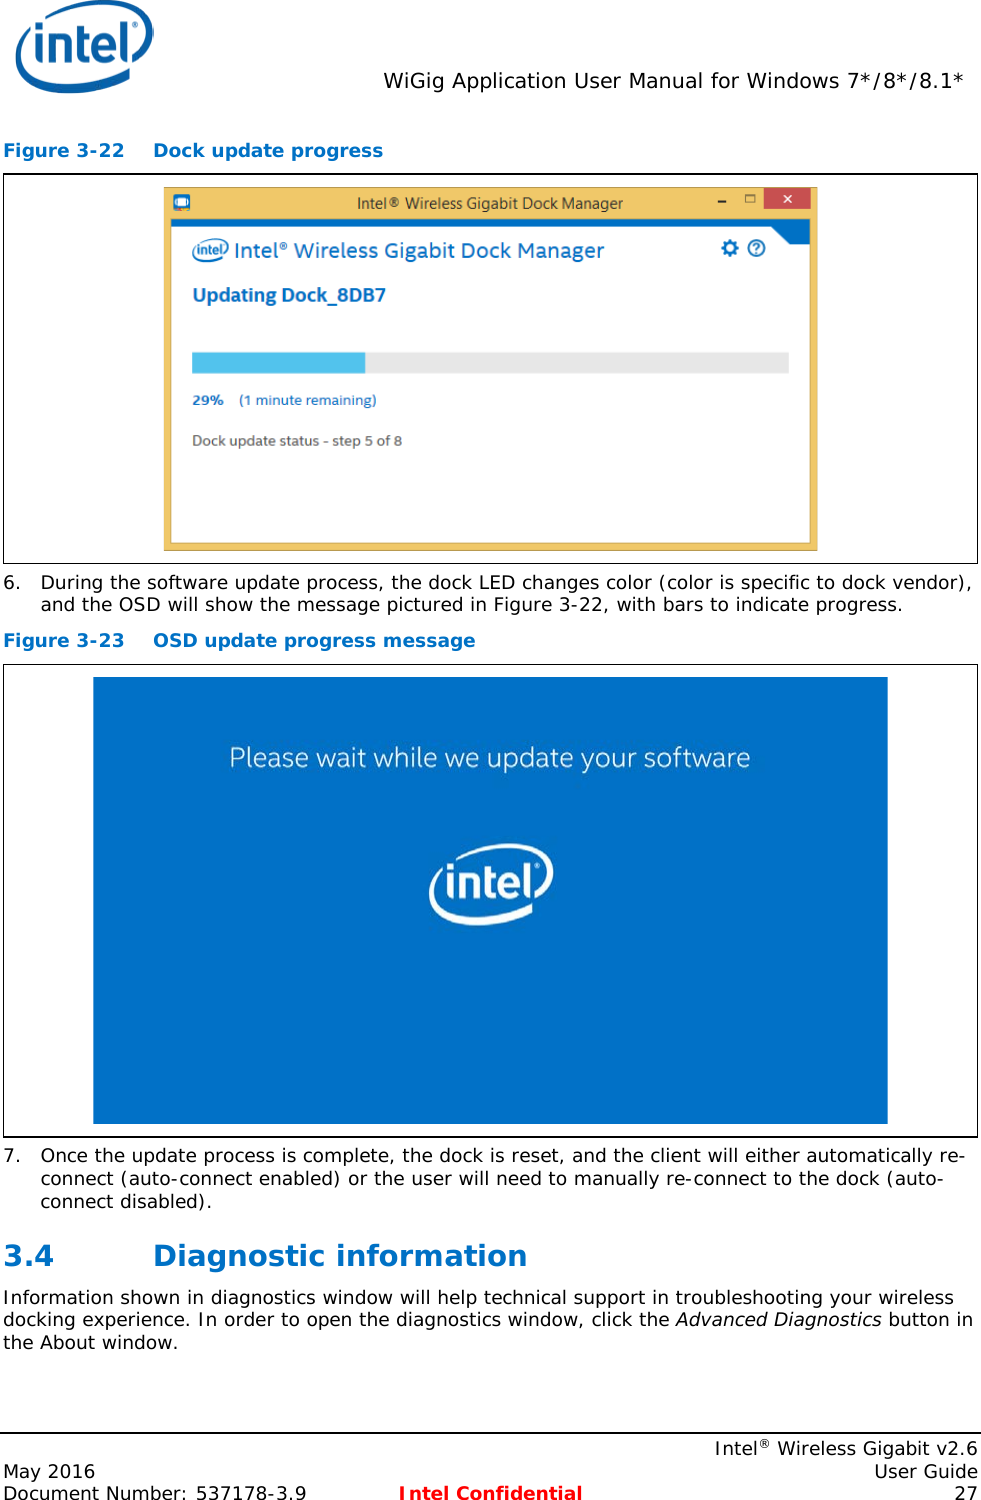  WiGig Application User Manual for Windows 7*/8*/8.1*    Intel® Wireless Gigabit v2.6 May 2016    User Guide Document Number: 537178-3.9 Intel Confidential 27 Figure 3-22 Dock update progress  6. During the software update process, the dock LED changes color (color is specific to dock vendor), and the OSD will show the message pictured in Figure 3-22, with bars to indicate progress. Figure 3-23 OSD update progress message  7. Once the update process is complete, the dock is reset, and the client will either automatically re-connect (auto-connect enabled) or the user will need to manually re-connect to the dock (auto-connect disabled). 3.4 Diagnostic information Information shown in diagnostics window will help technical support in troubleshooting your wireless docking experience. In order to open the diagnostics window, click the Advanced Diagnostics button in the About window. 